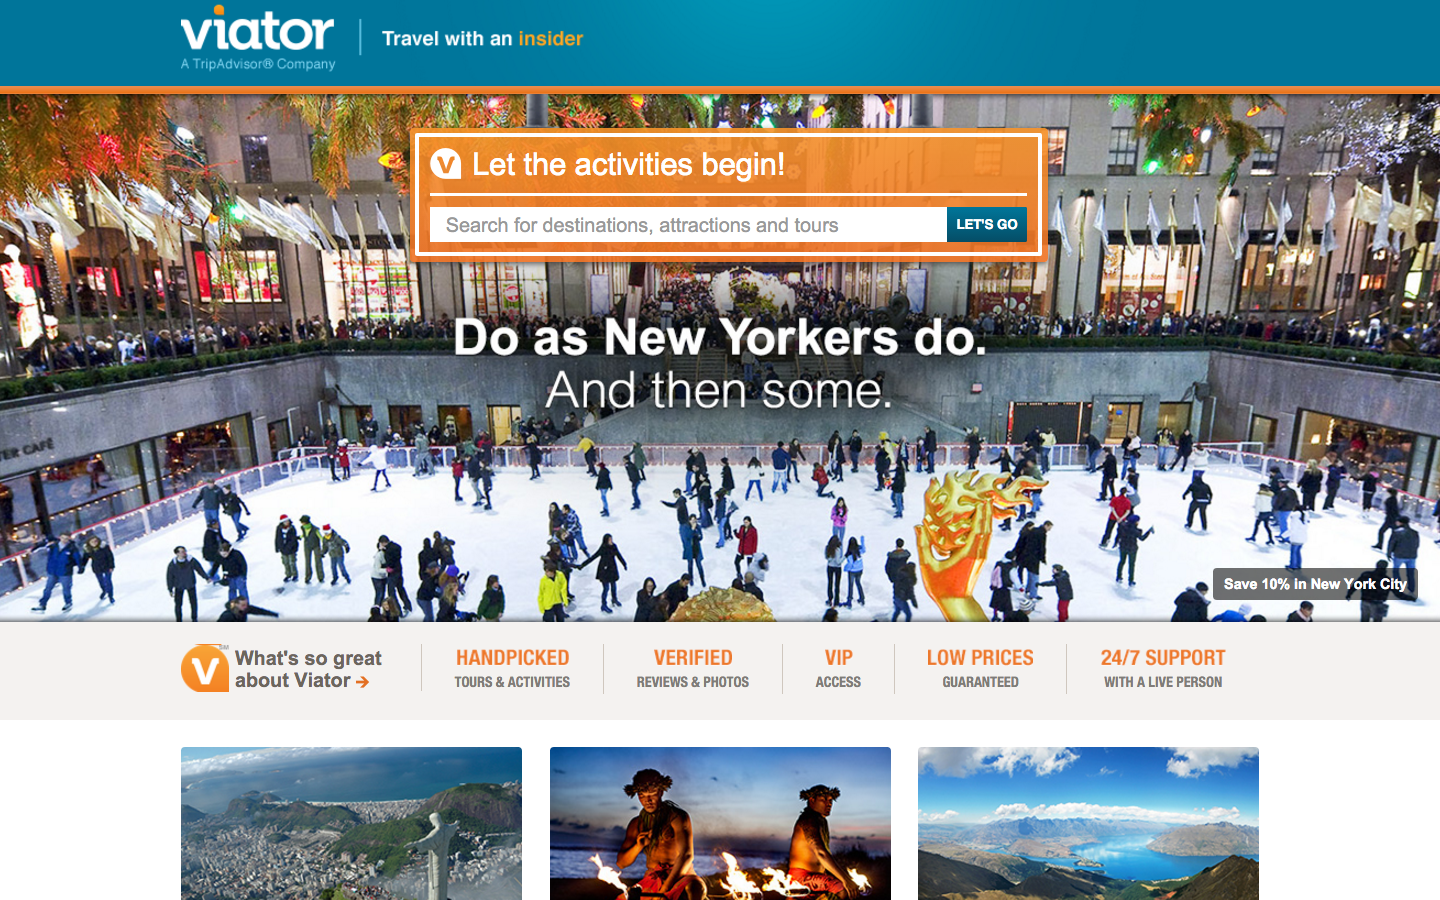 TripAdvisor’s $200 million acquisition of Viator in 2014 offers a sign of growing consolidation moves in the tours and activities sector (Viator).